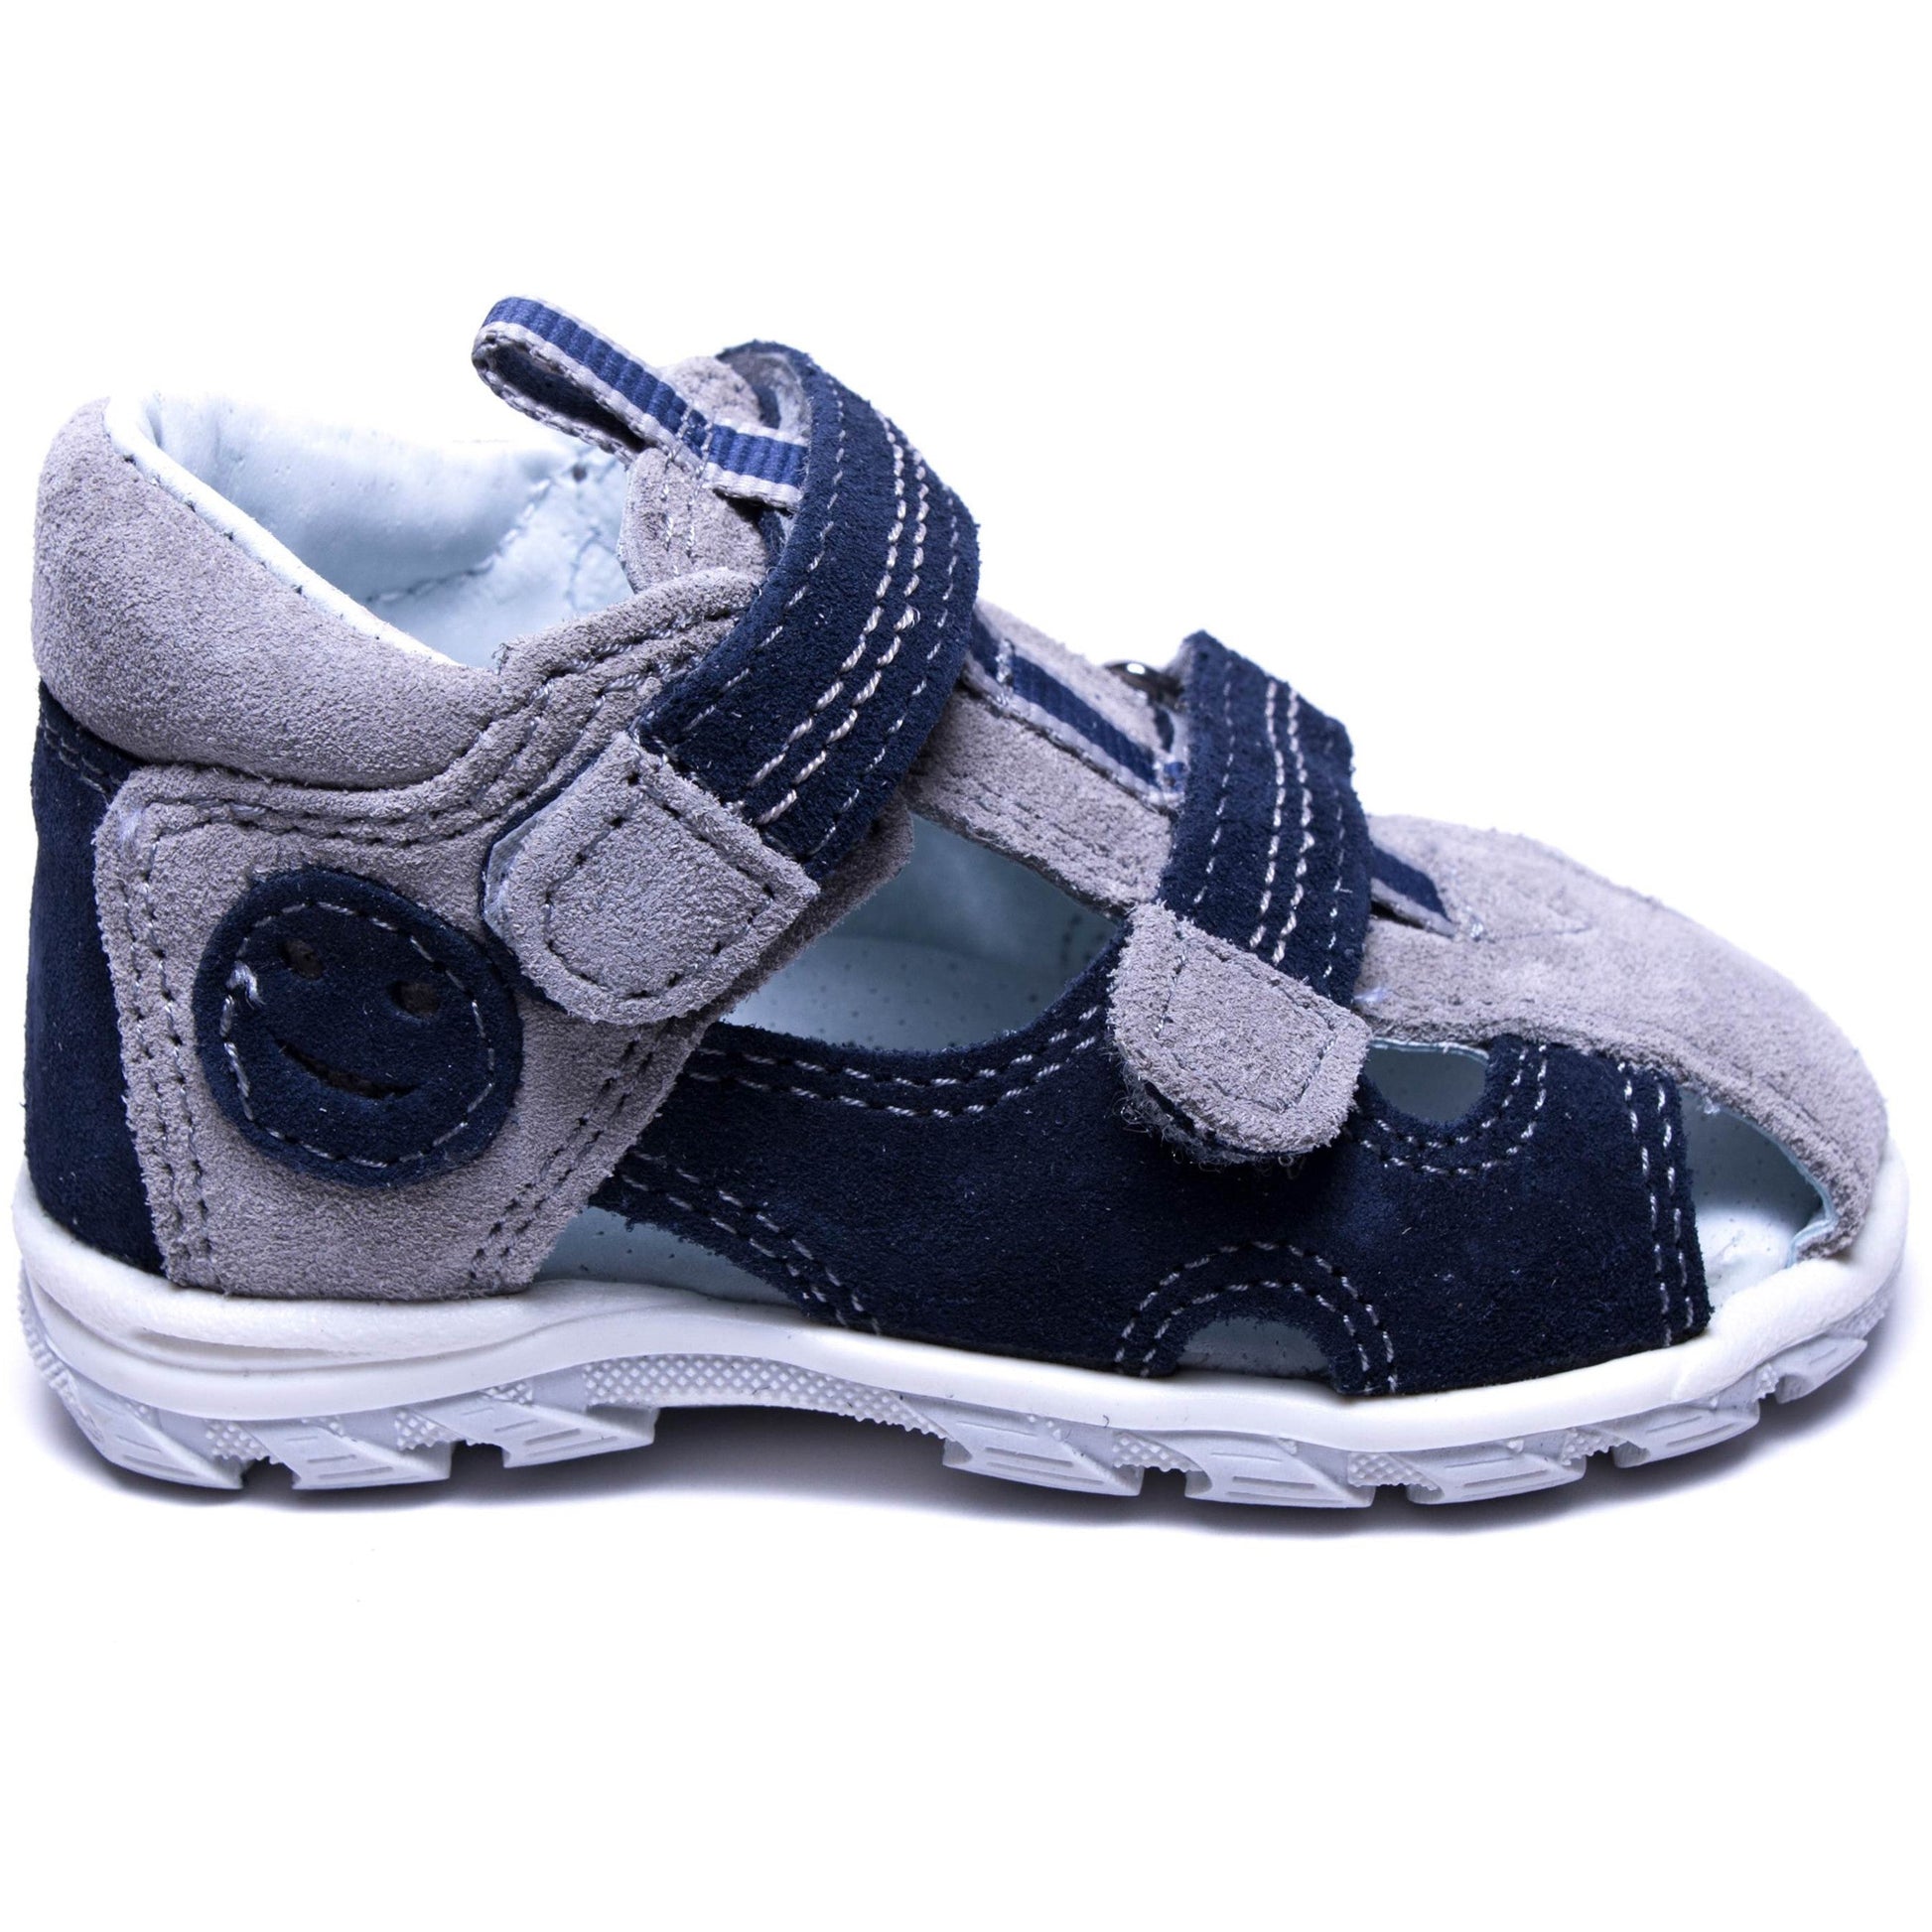 Certified orthopedic toddler boy sandal has a high arch support, firm heel counter, 2 velcro closures, and a semi open toe box. Its design is appealing and they look like any summer sandals on the outside.